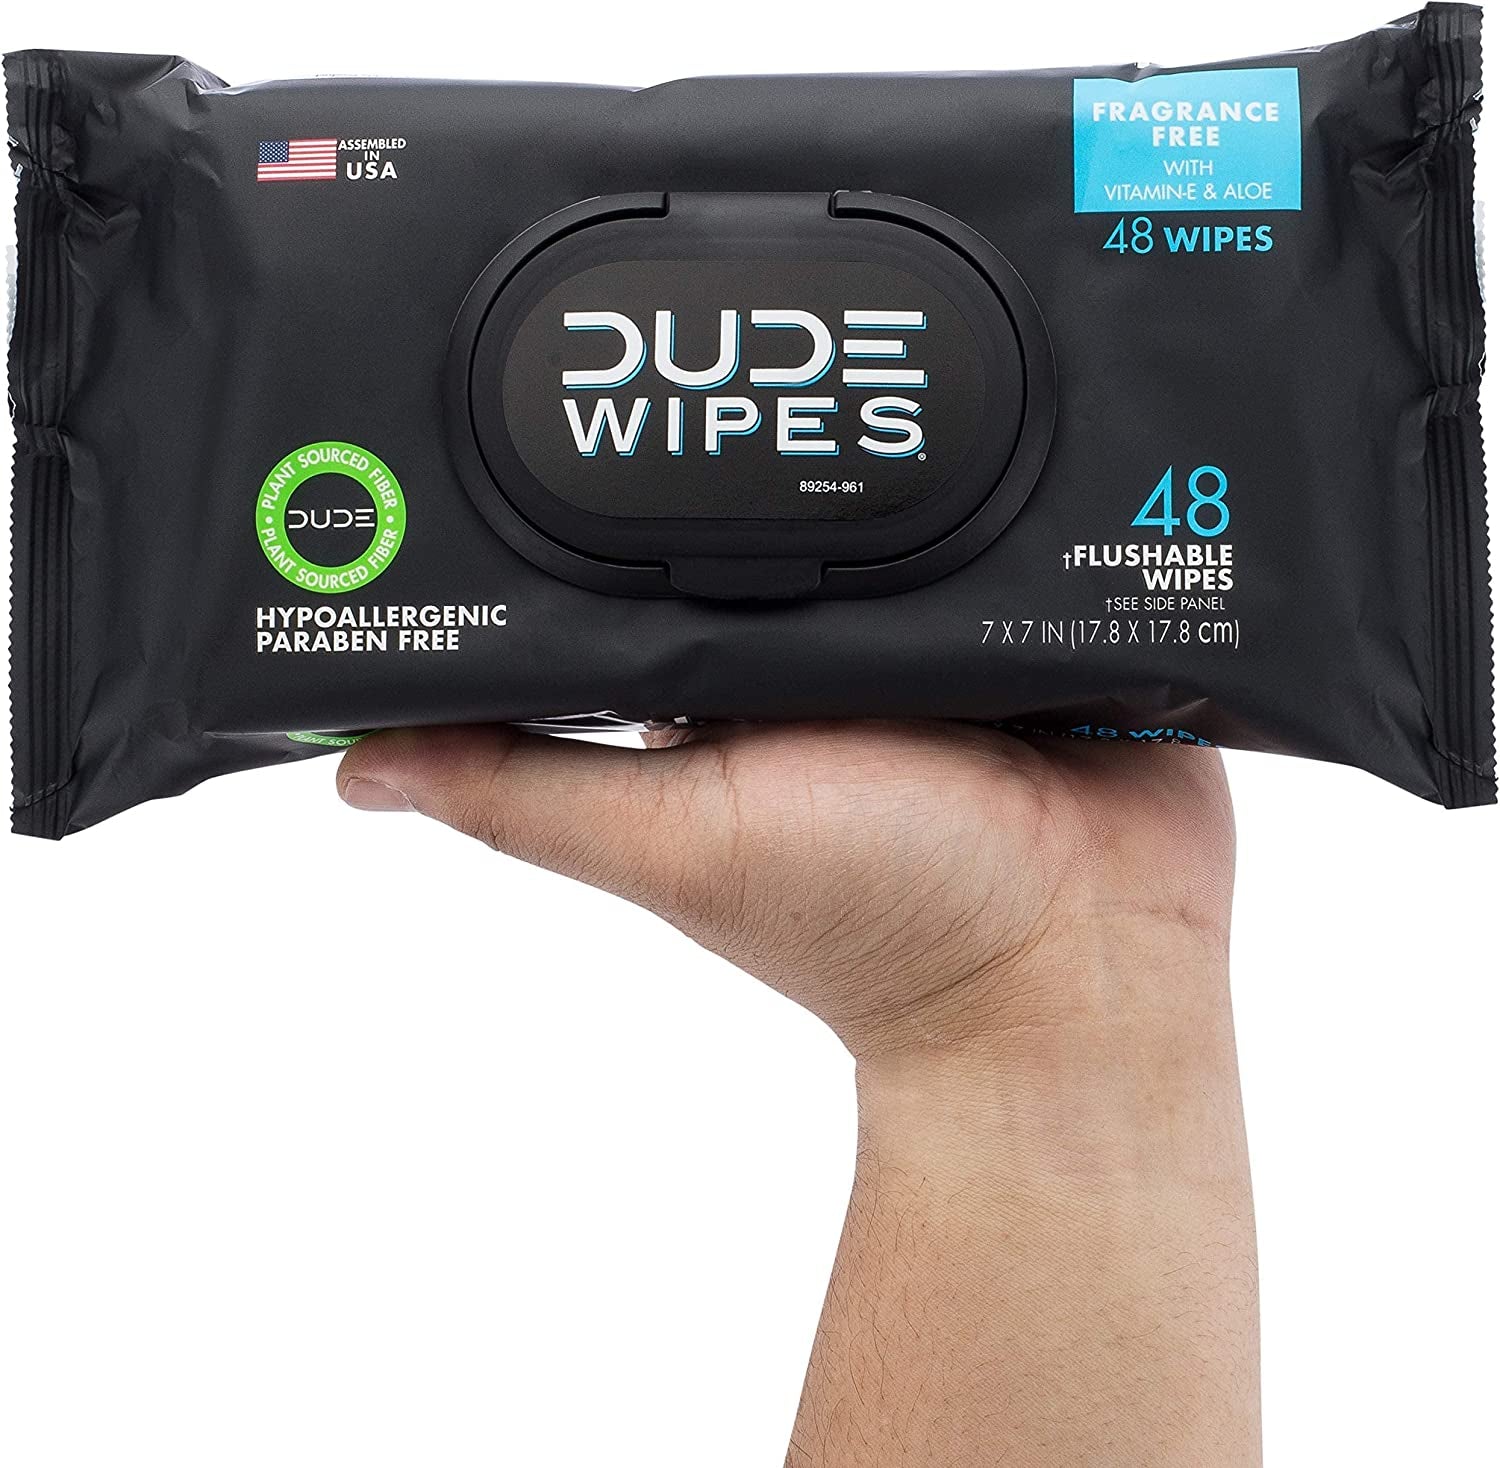 - Flushable Wipes - 3 Pack, 144 Wipes - Unscented Extra-Large Adult Wet Wipes - Vitamin-E & Aloe for At-Home Use - Septic and Sewer Safe